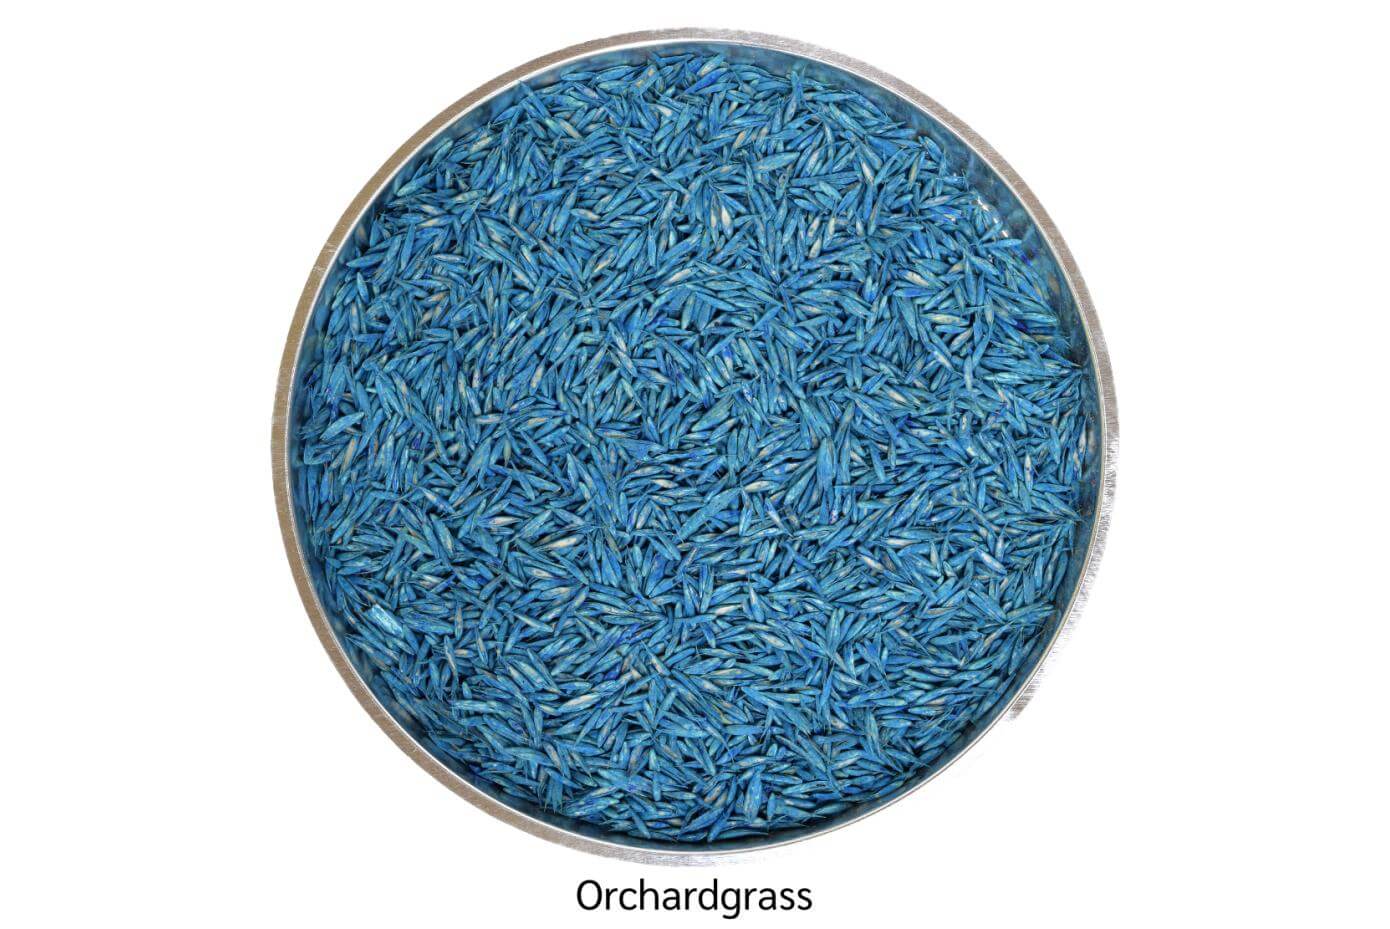 10 Lbs. Certified Persist Orchard grass Seed